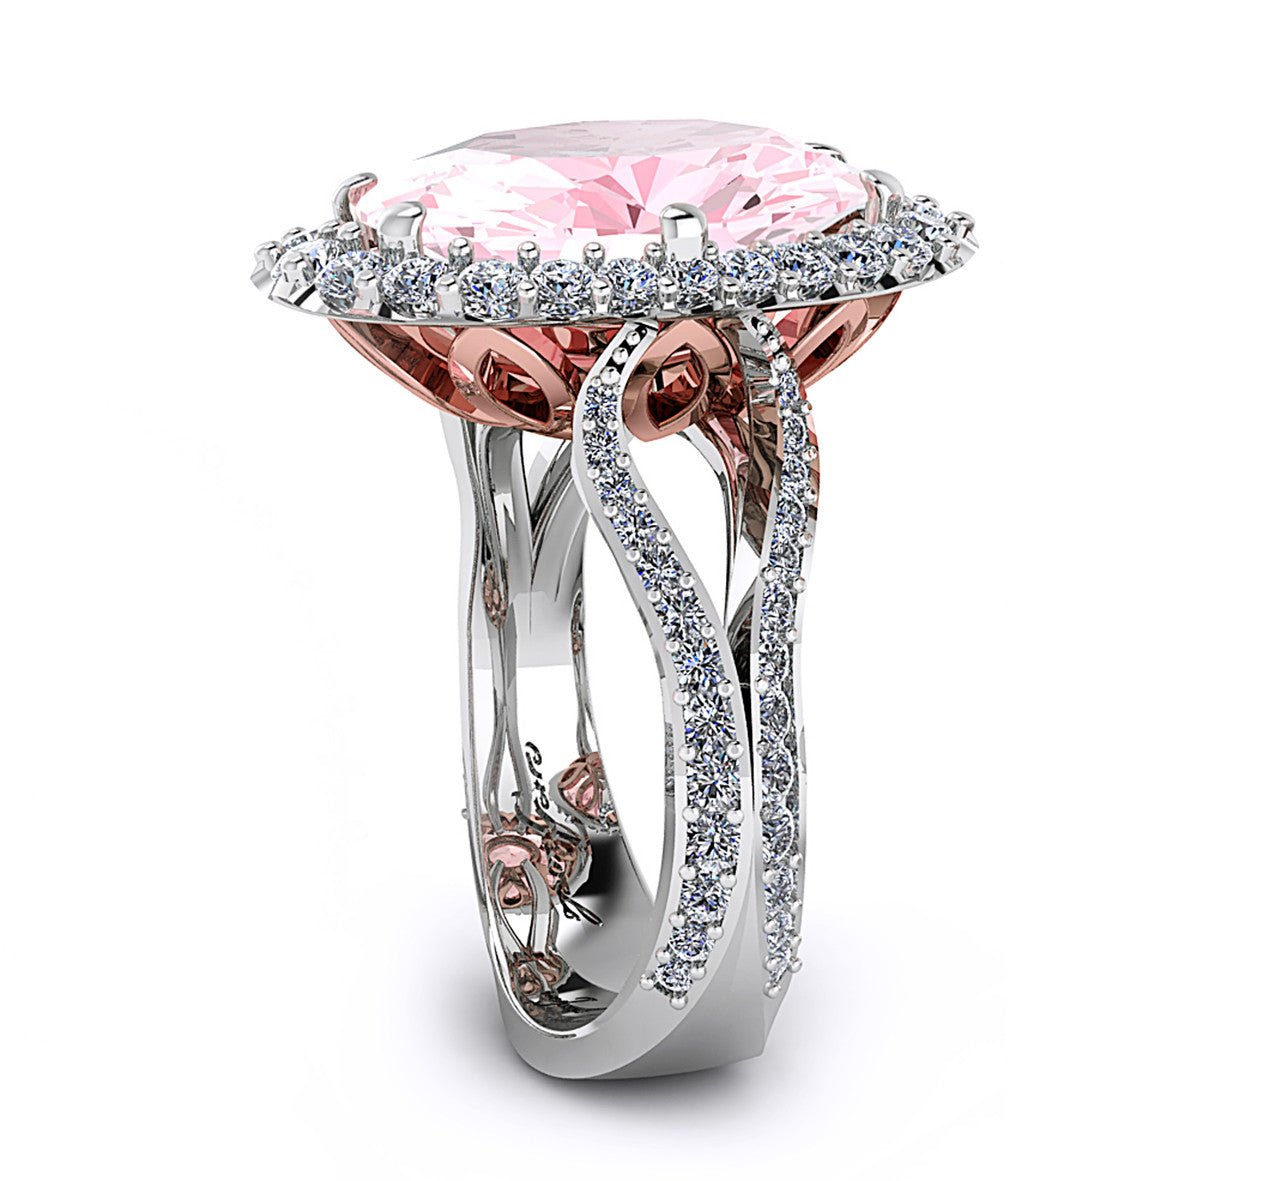 Pink Morganite Ring with a Halo of Diamonds - ForeverJewels Design Studio 8